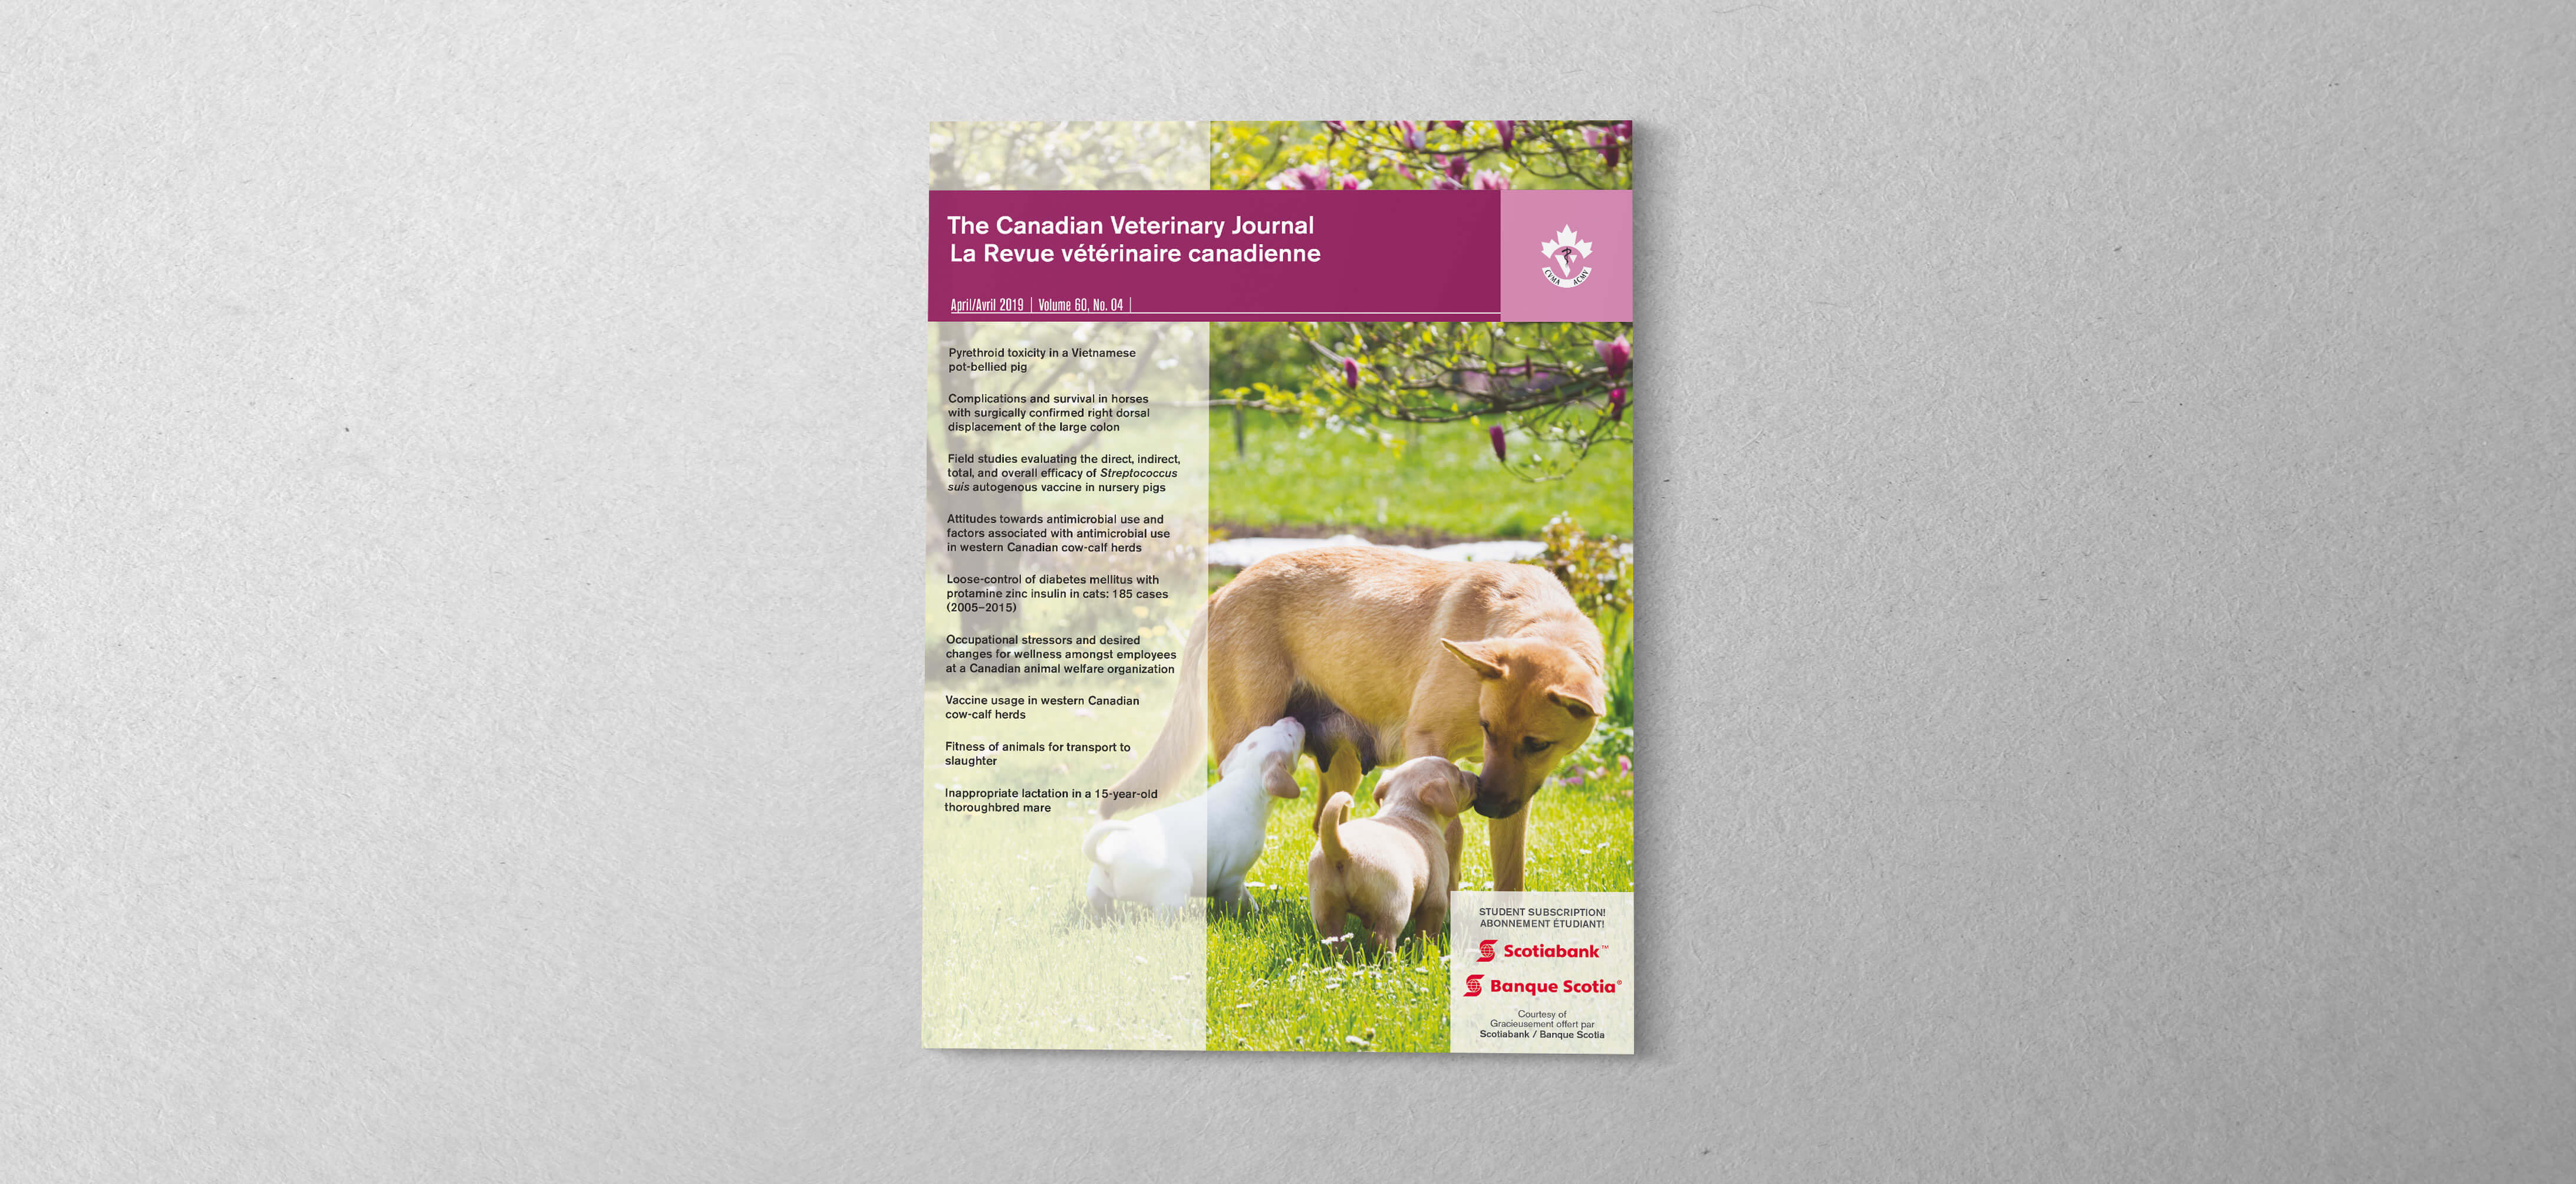 The Canadian Veterinary Journal AN Design Communications